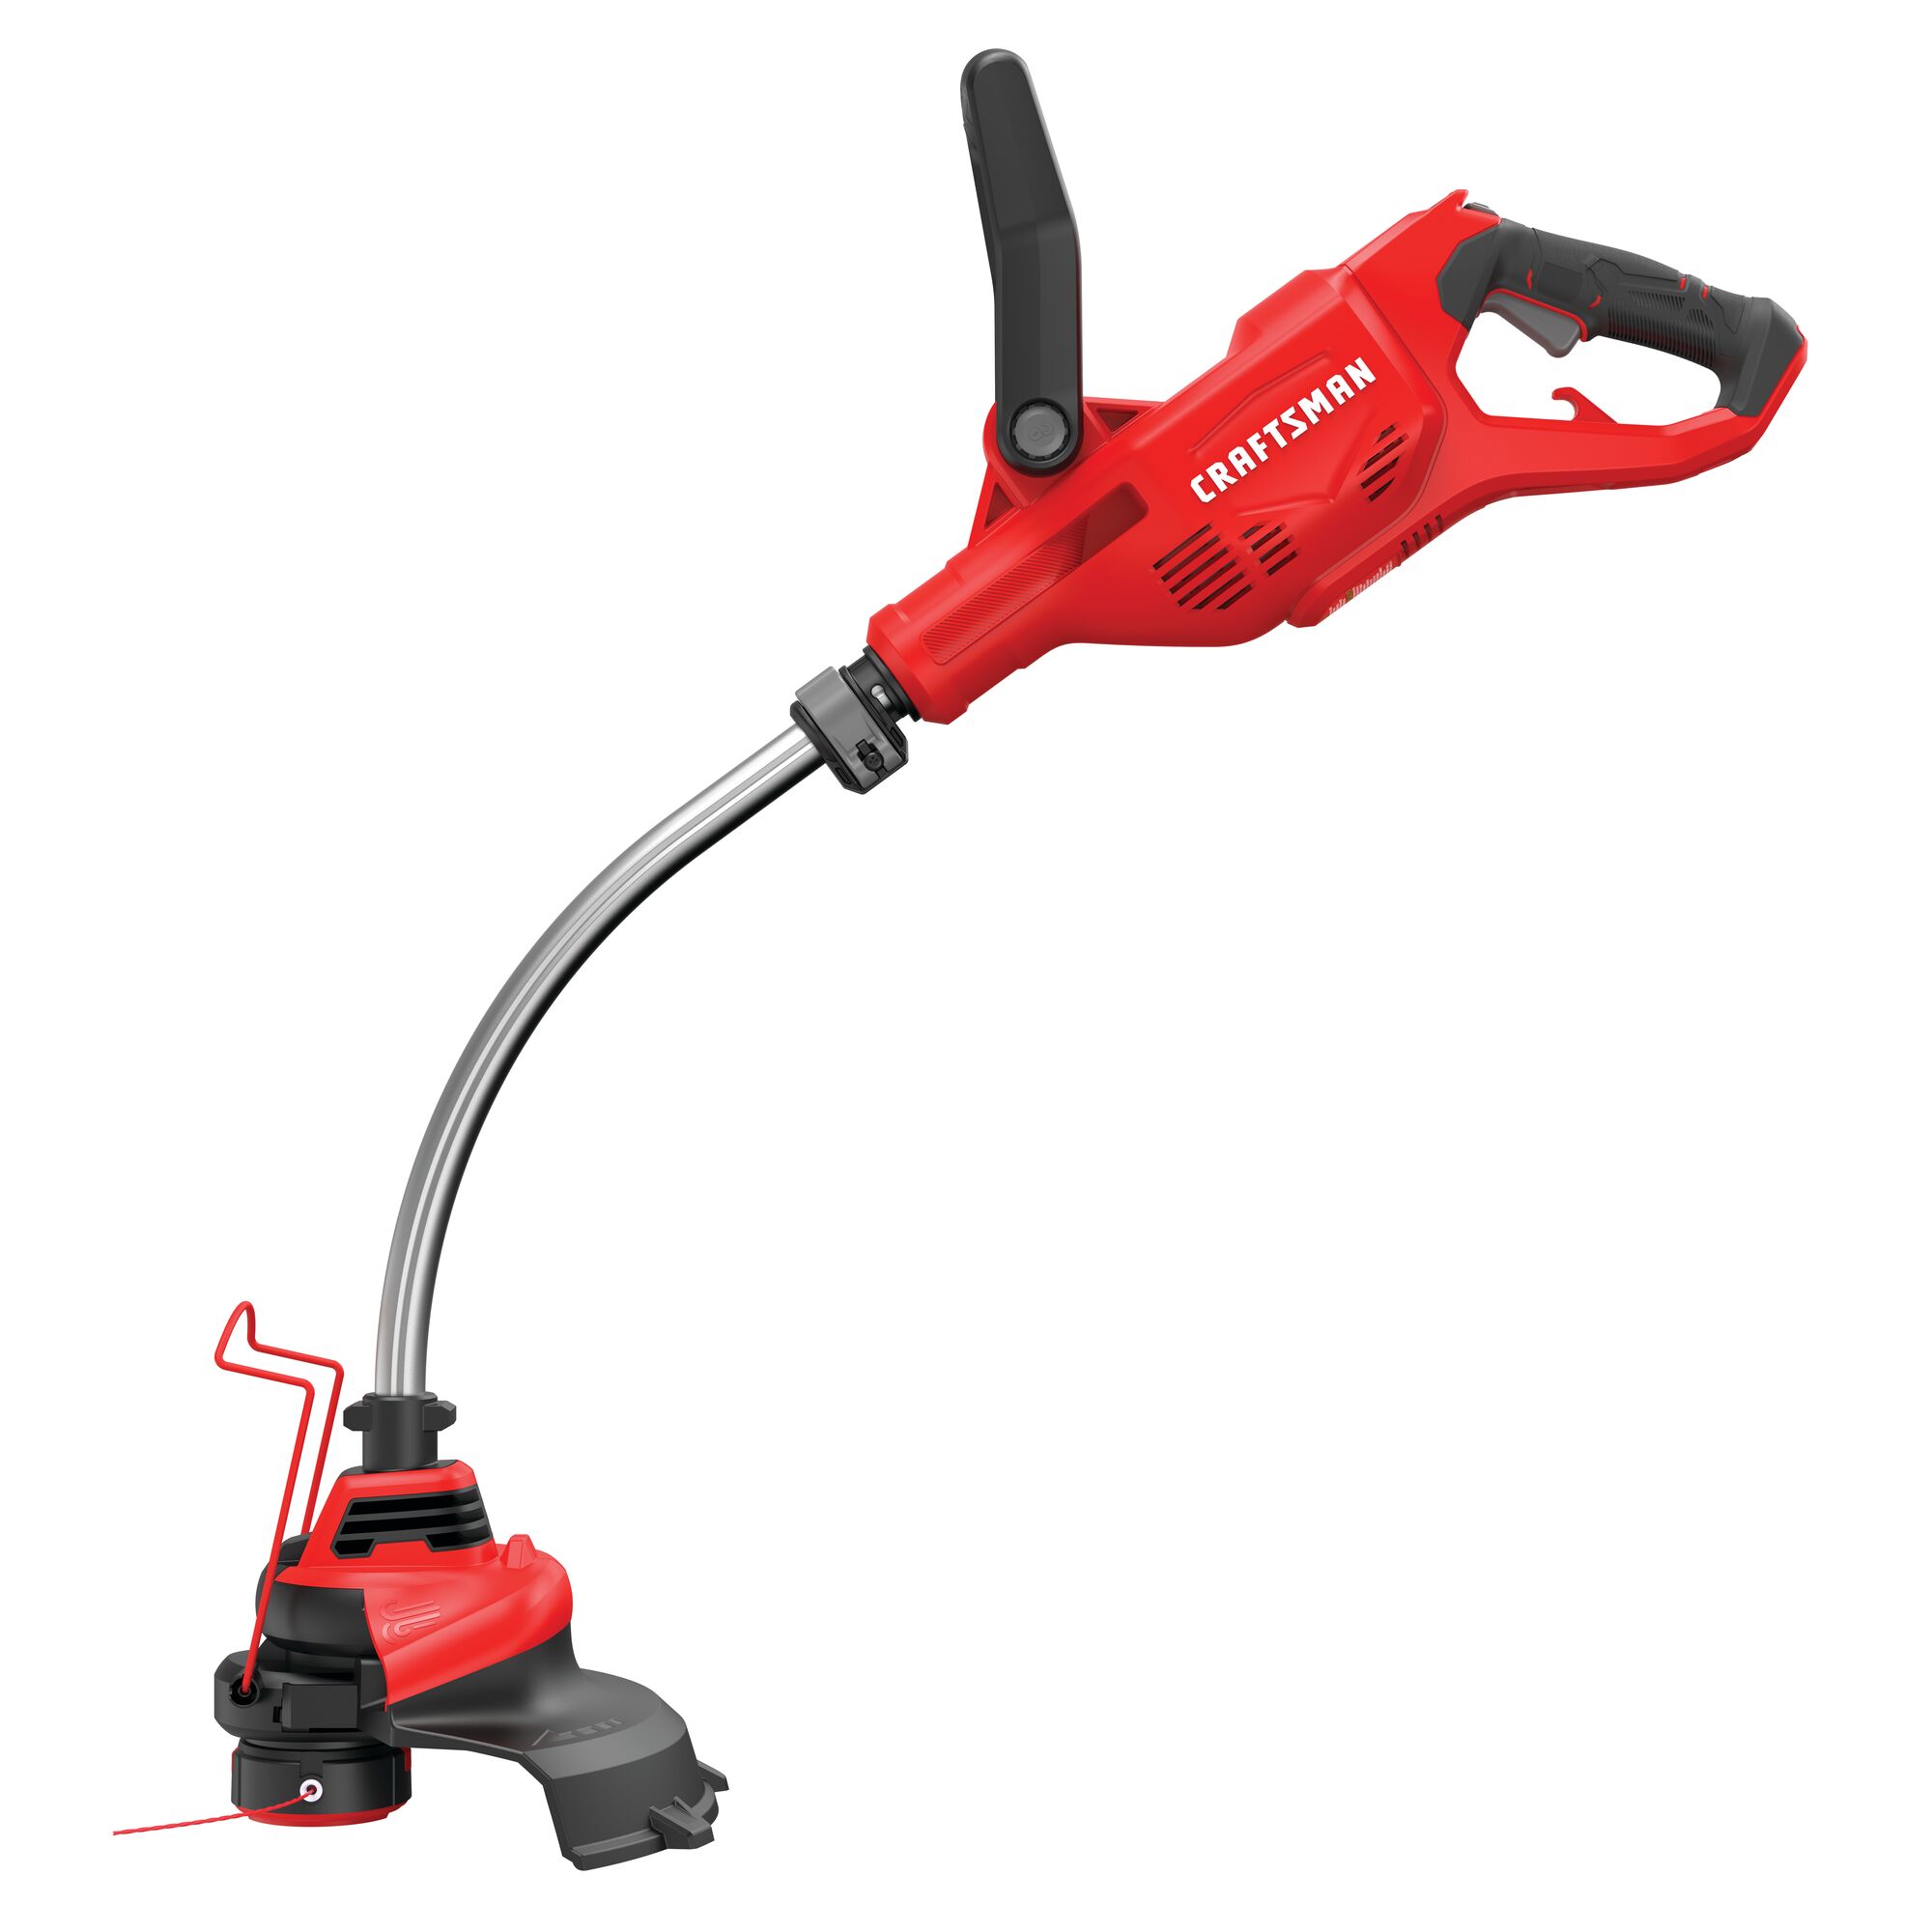 View of CRAFTSMAN String Trimmers on white background